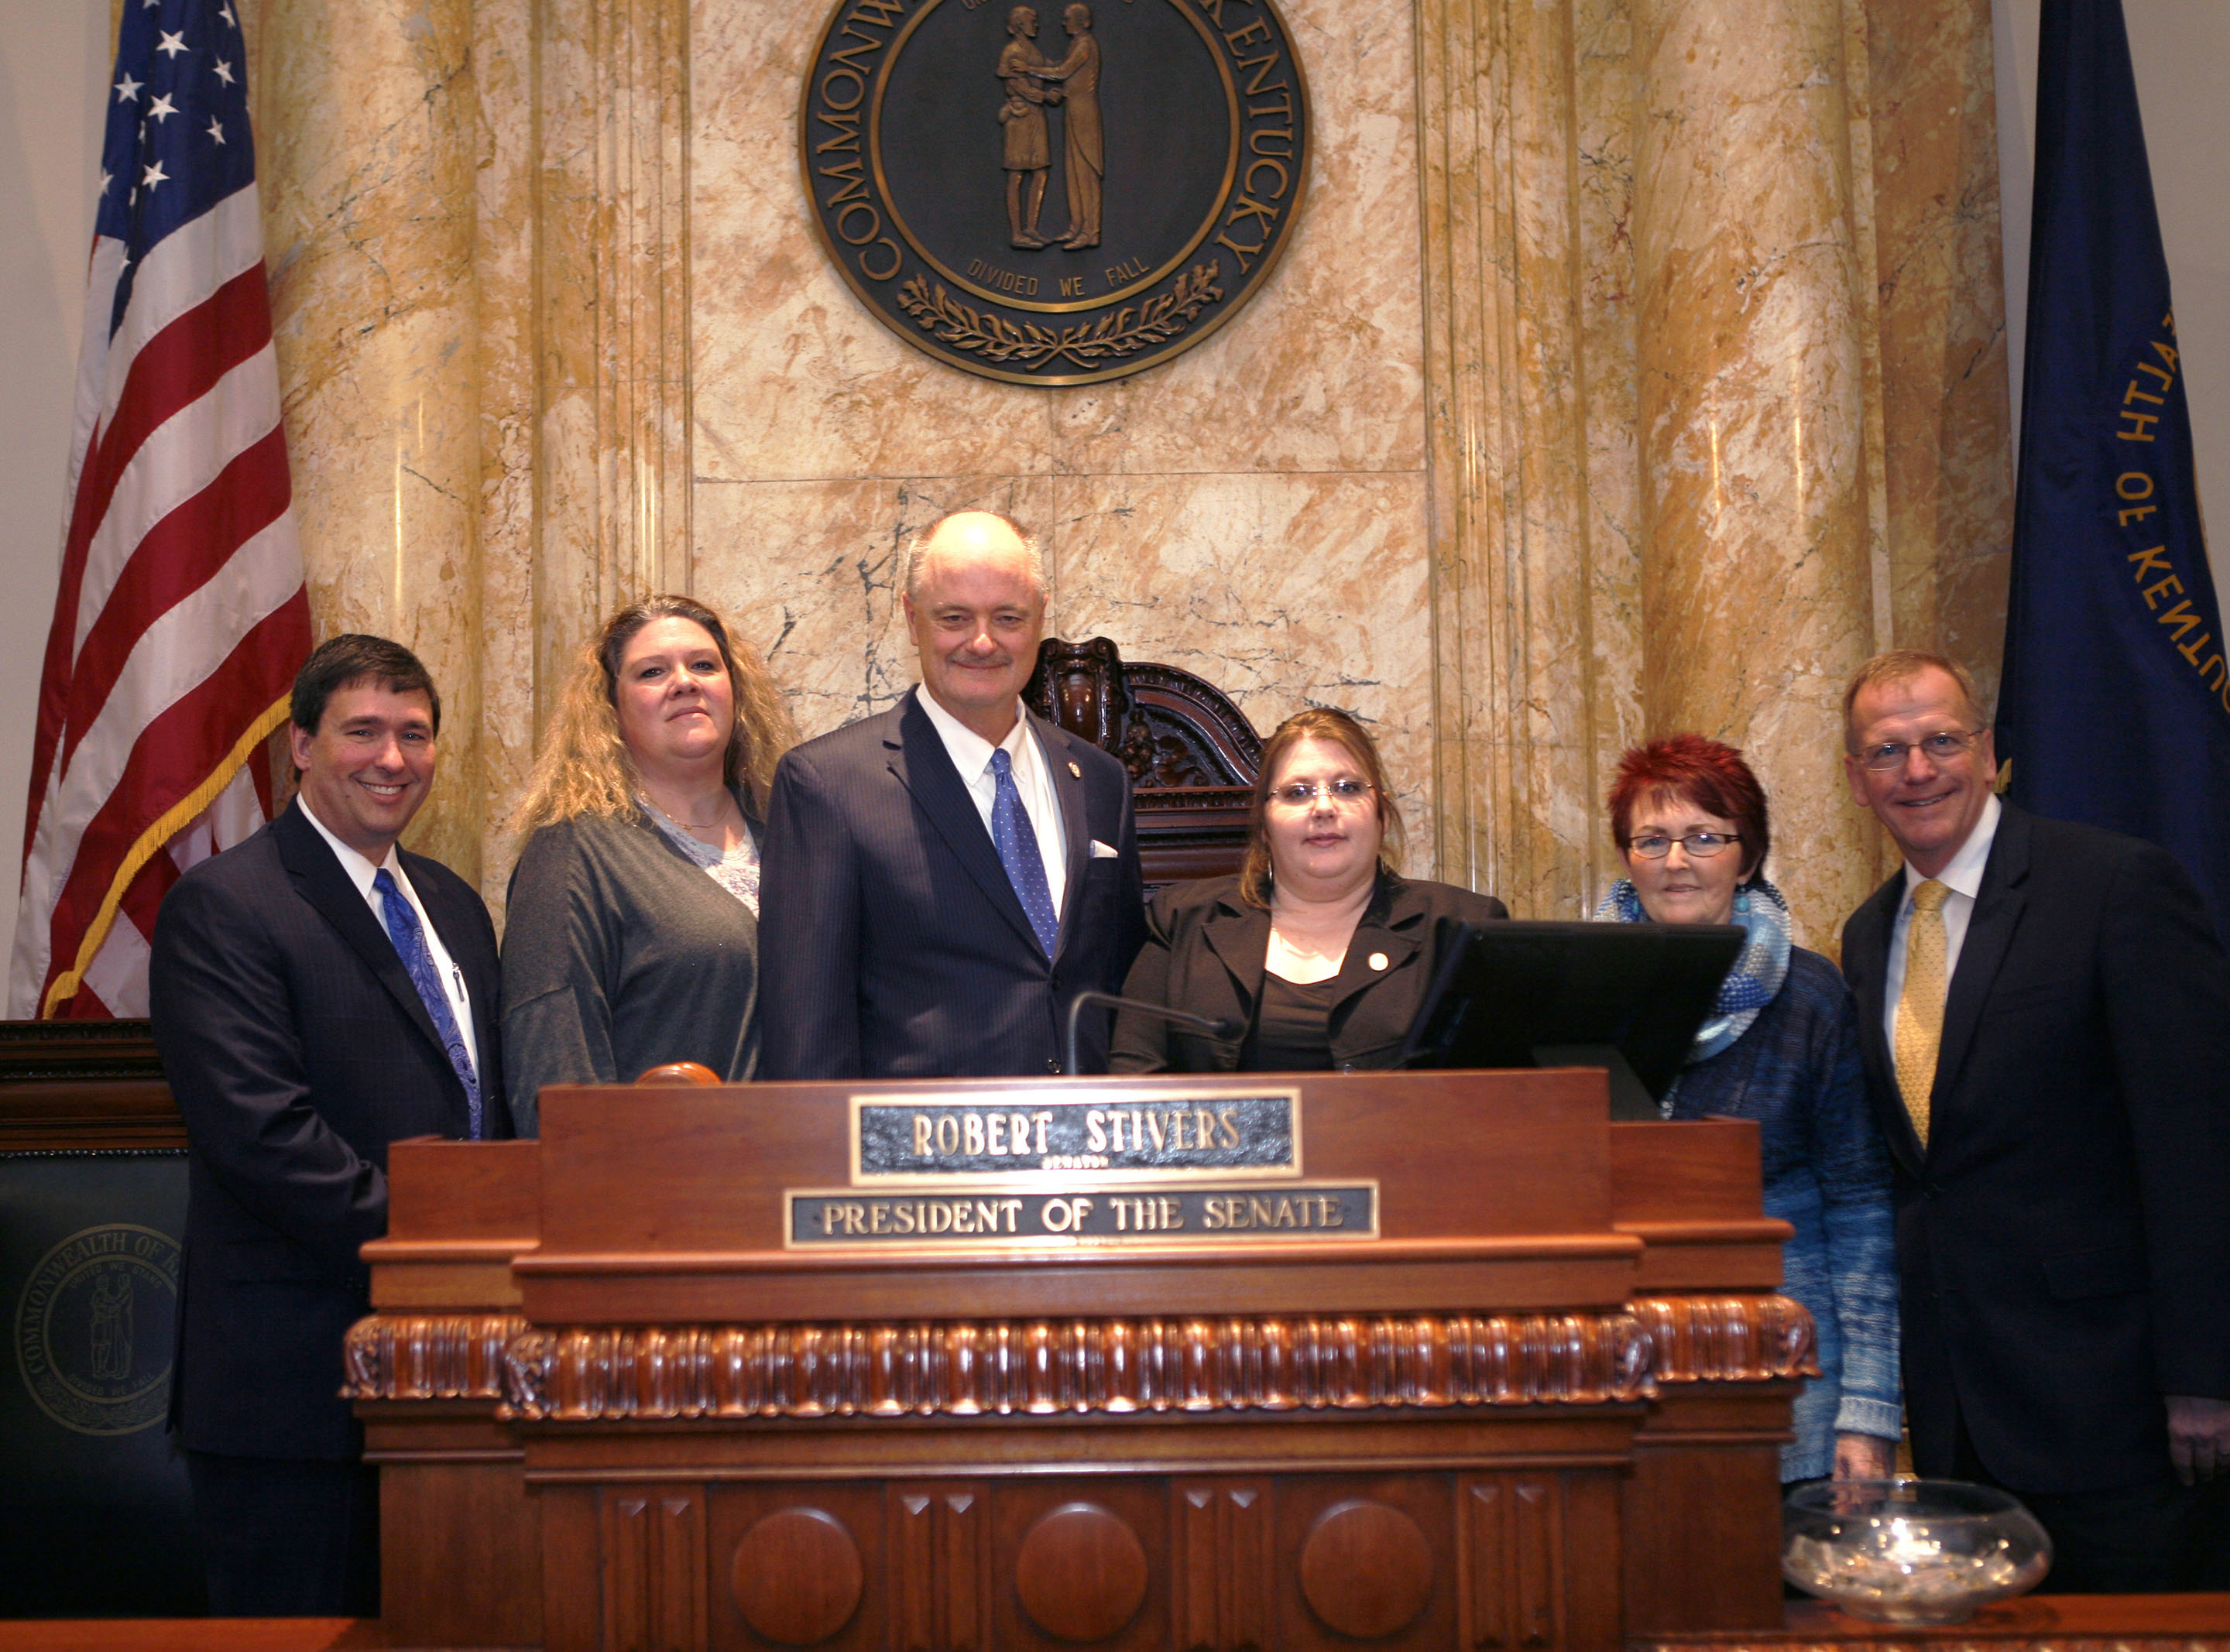 Sen. John Schickel (R-Union) stands with Kentucky Education Commissioner Stephen Pruitt and representatives from the Boone County School District at the rostrum of the Senate chamber at the Kentucky State Capitol prior to the reading of a resolution honoring the state’s school bus drivers. From left to right are Pruitt; Beverly Daniels, a bus driver for the Boone County schools; Schickel; Heather Roth, Boone County director of transportation; Helen Cottongim, Boone County transportation training coordinator; and Randy Poe, Boone County superintendent. The resolution was adopted unanimously by the Senate. Photo by Mike Marsee, Jan. 12, 2016